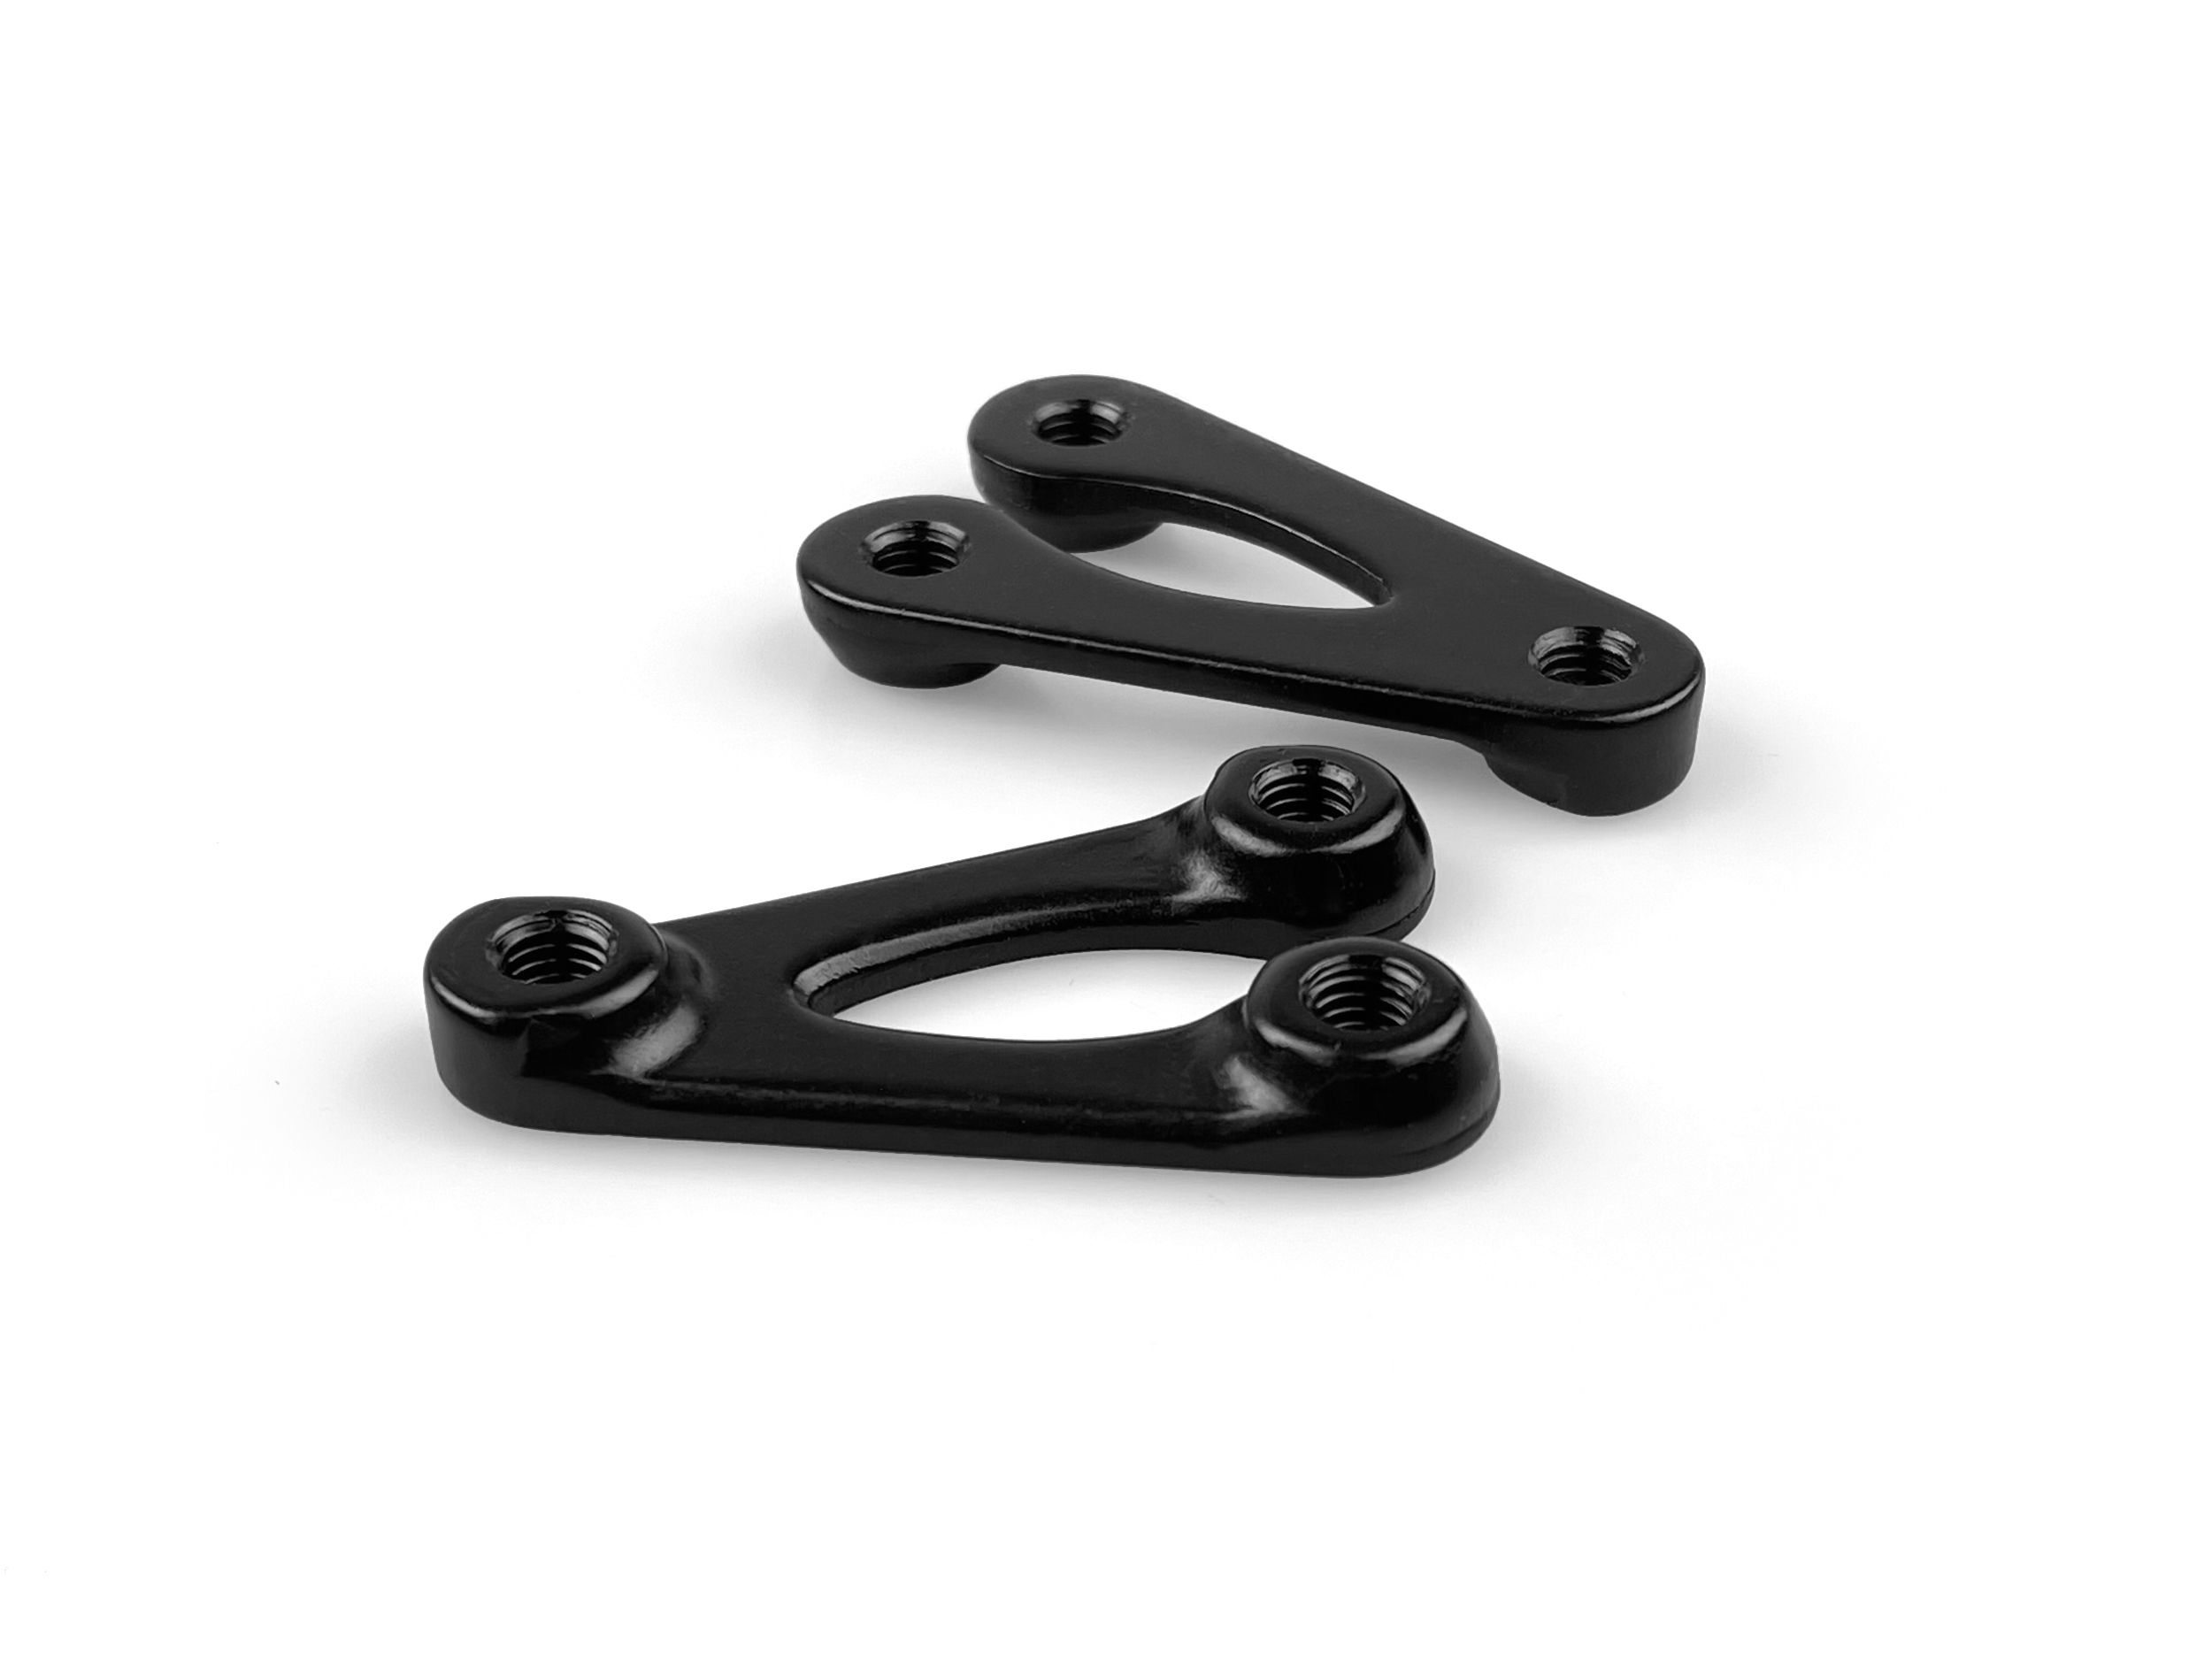 DART-A19997_Shock mounts with bolts for 185x50mm shock (Trail version) for Rocbird frame